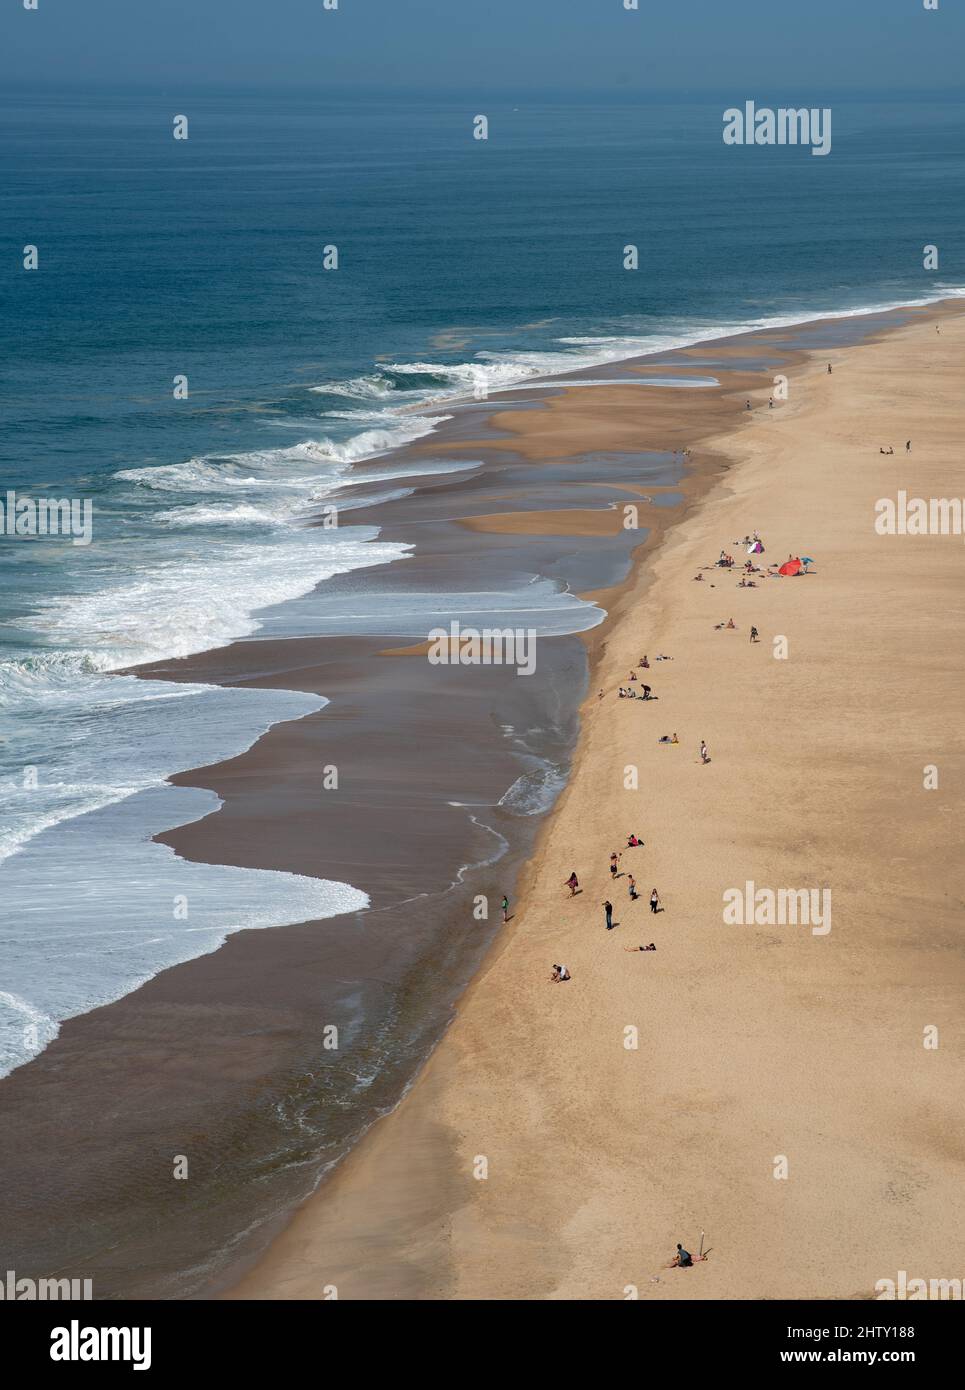 Tourist people relaxing and sunbathing a sandy tropical beach. Nazare Portugal Stock Photo